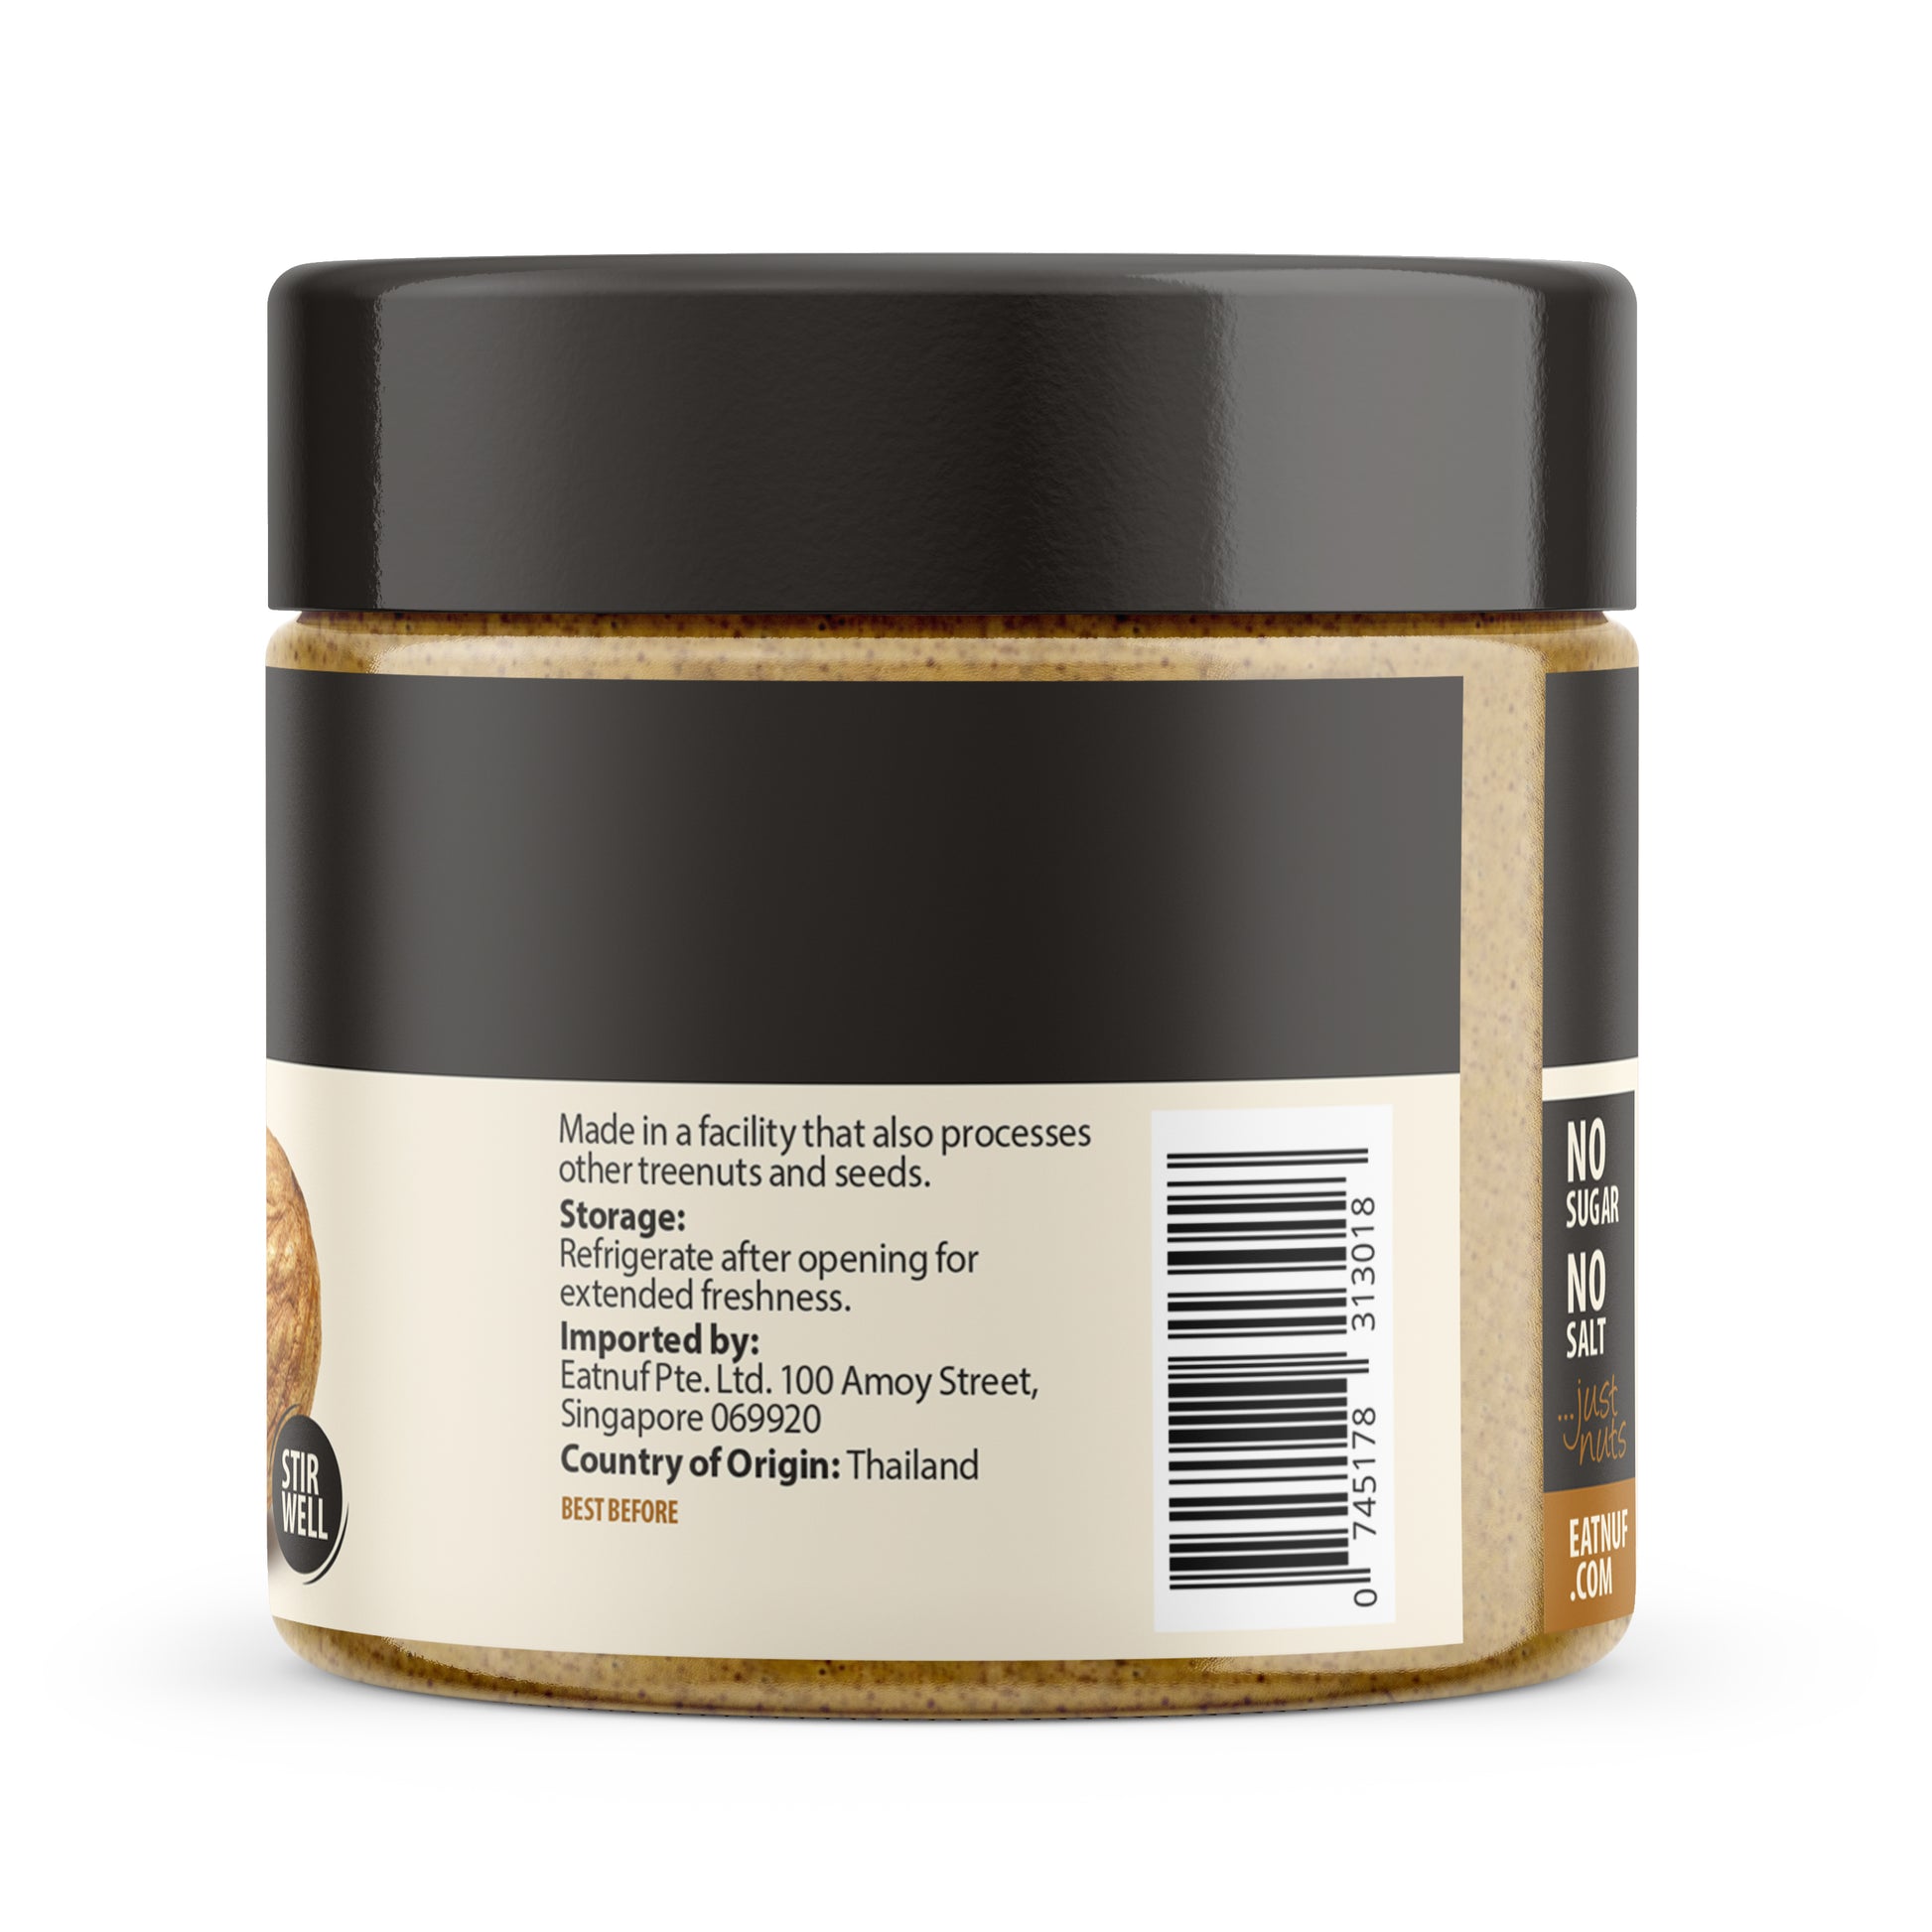 eatnuf almond butter smooth label